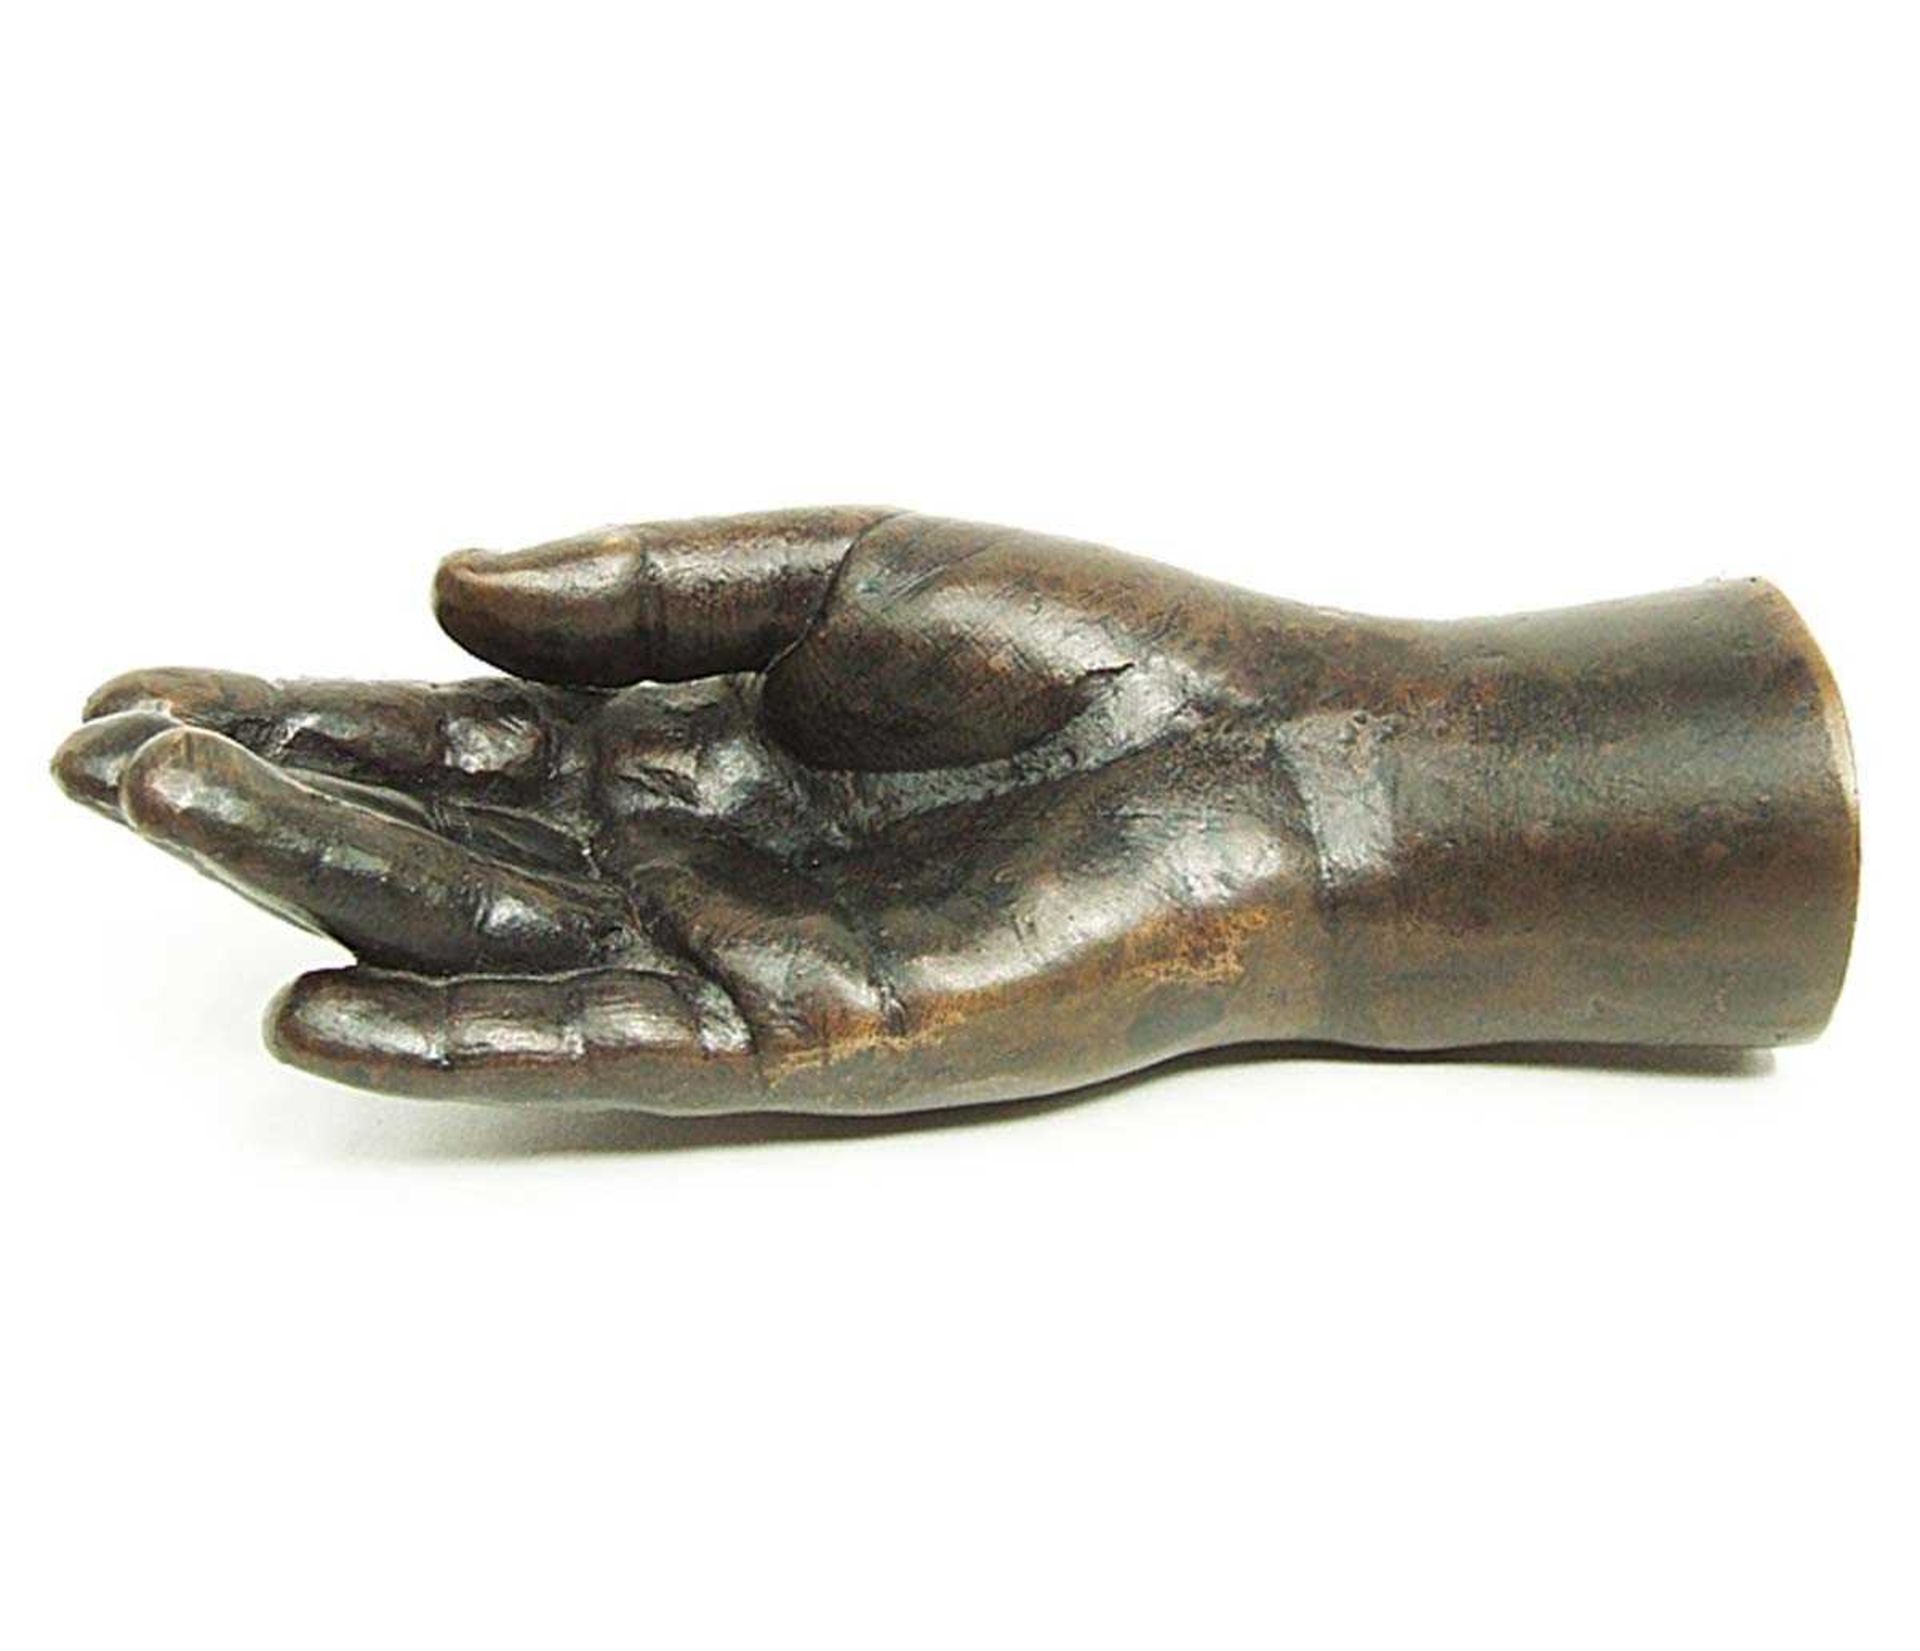 Kate Braine (b. 1964), a bronze model of an outstretched hand, l. 15 cm